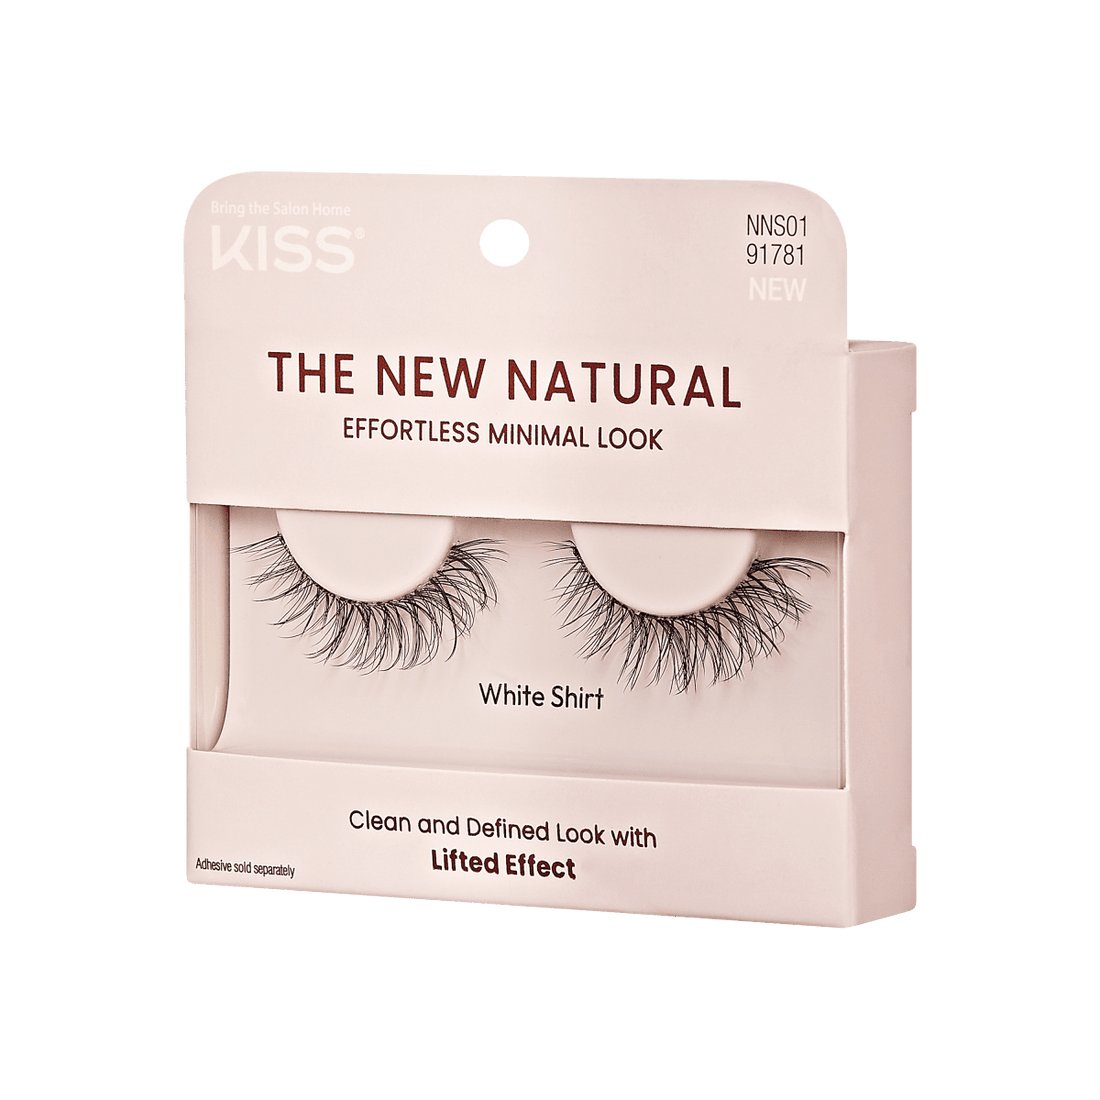 A package of The New Natural false lashes by KISS in White Shirt. Lashes designed for a natural look